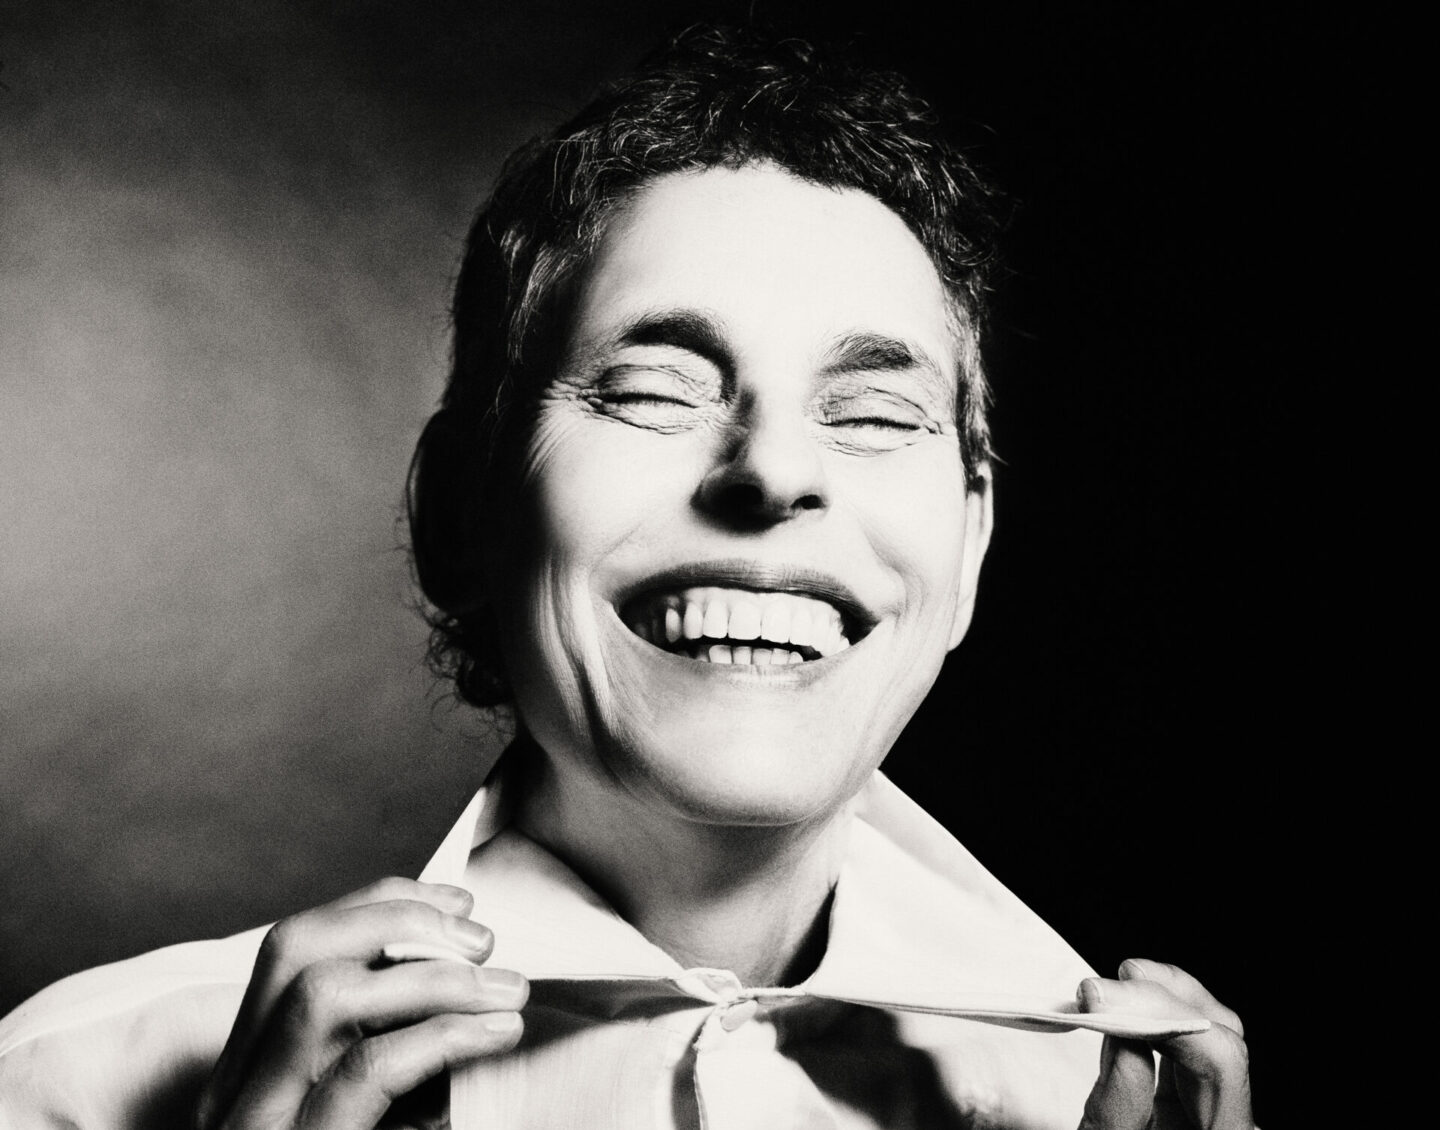 A black and white headshot of a laughing woman with short dark hair, pulling on her collar with both hands